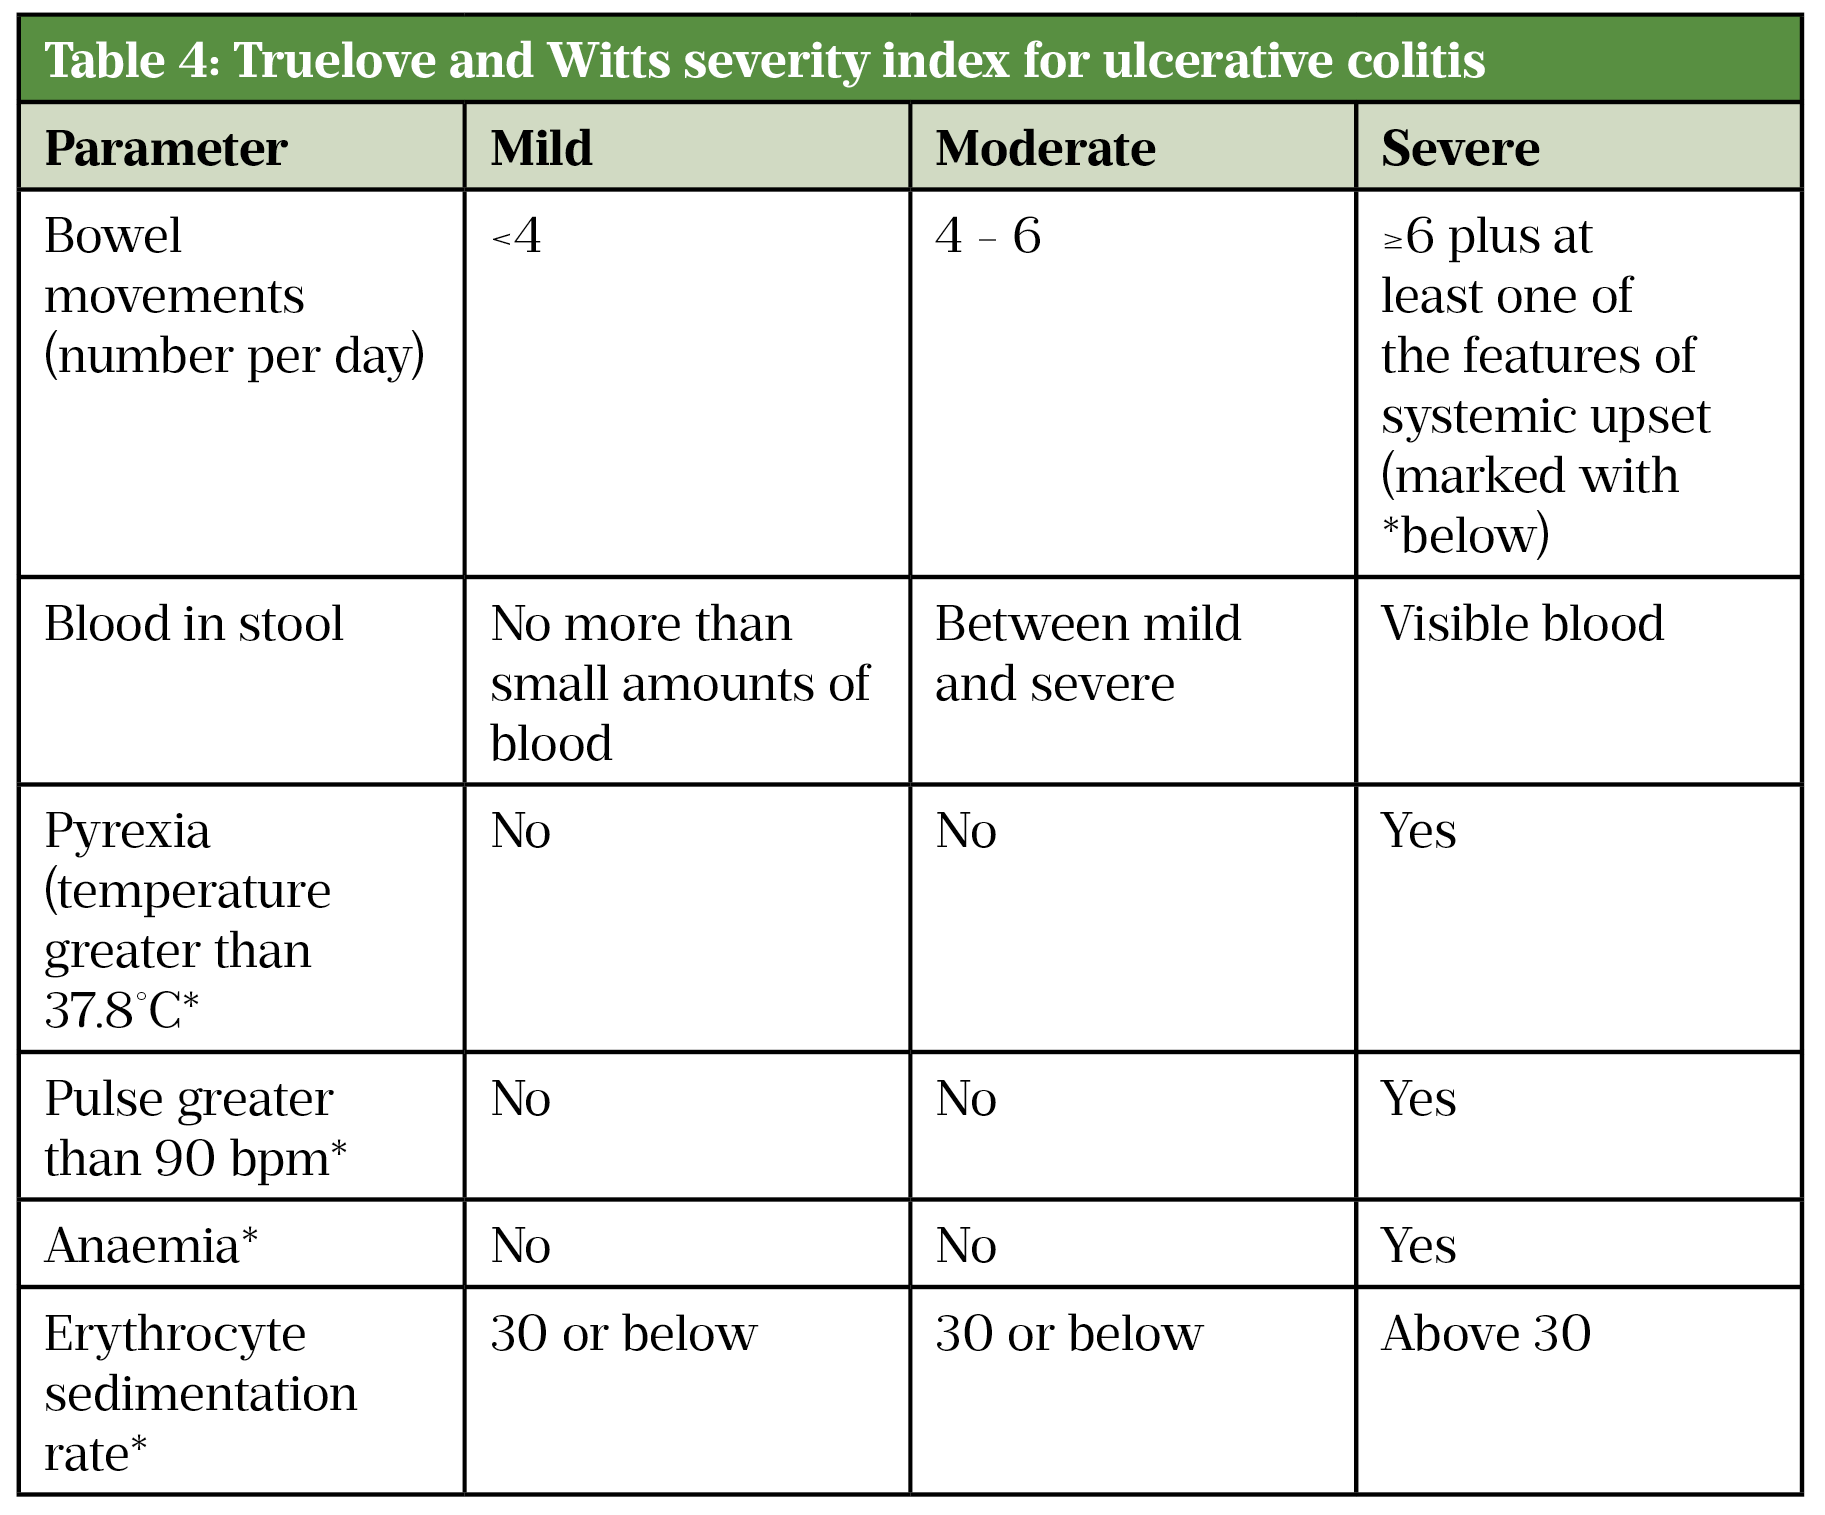 Table 4 Truelove and Witts severity index for ulcerative colitis 